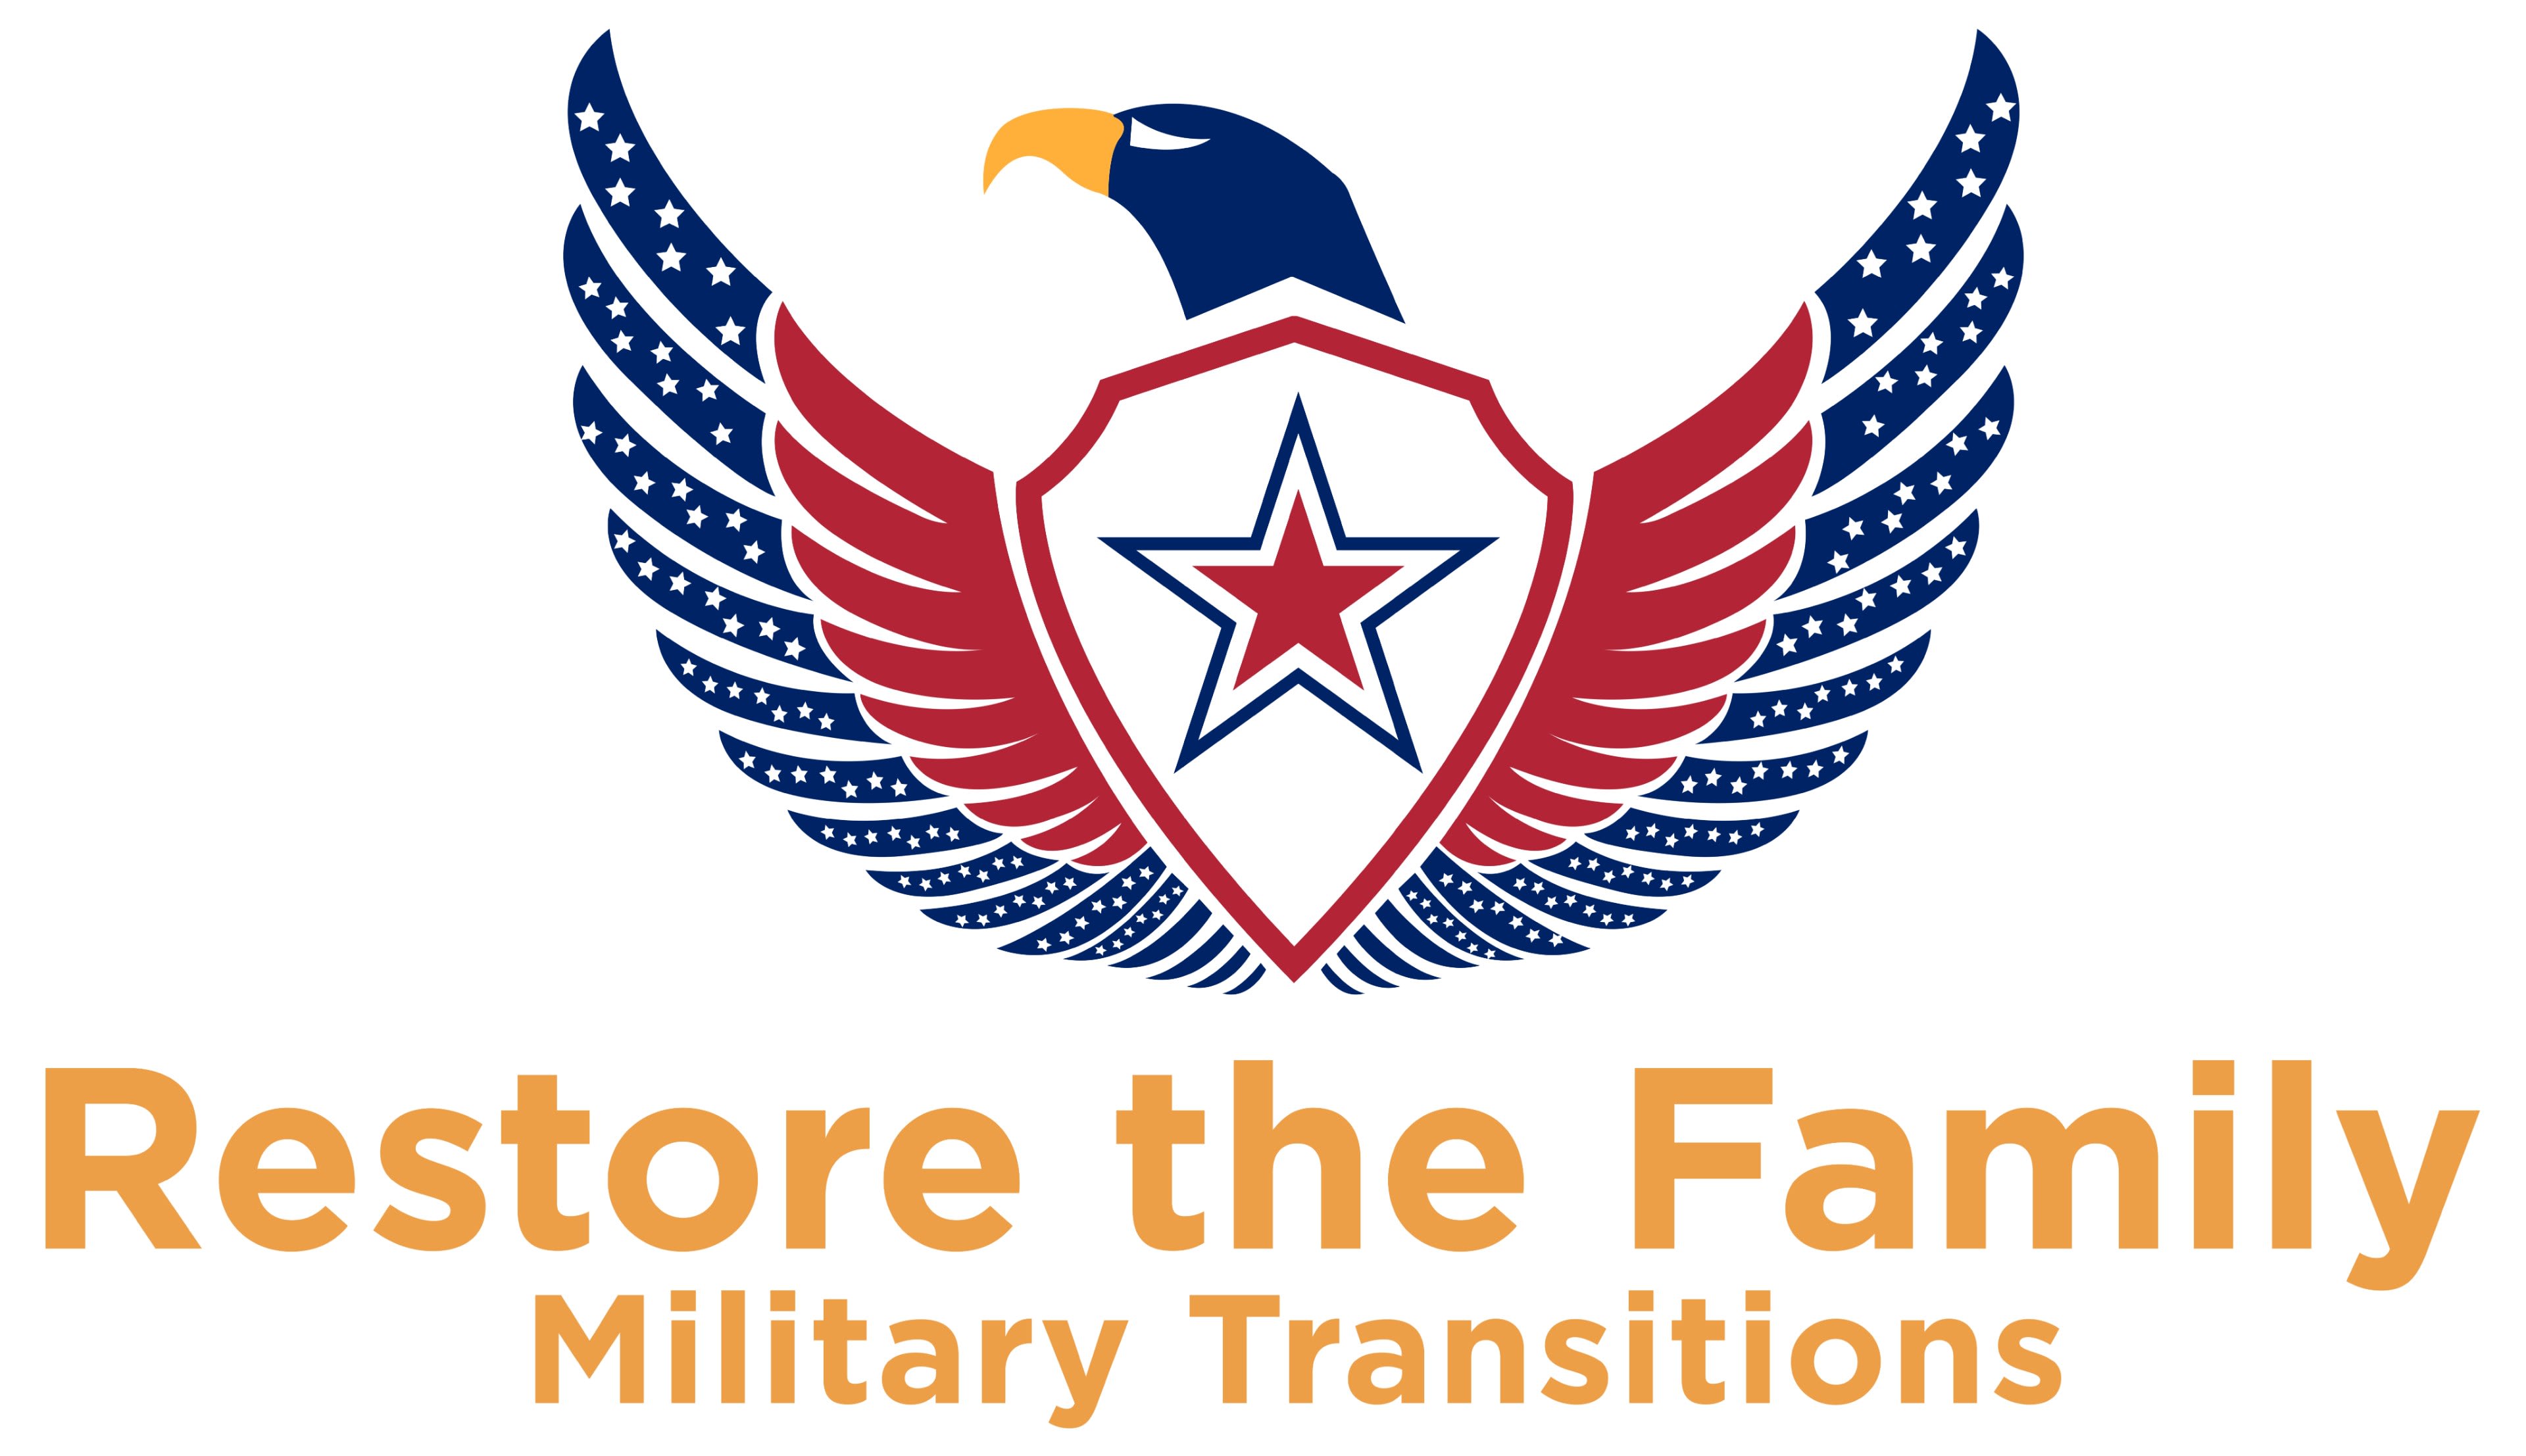 Restore the Family: Military Transitions